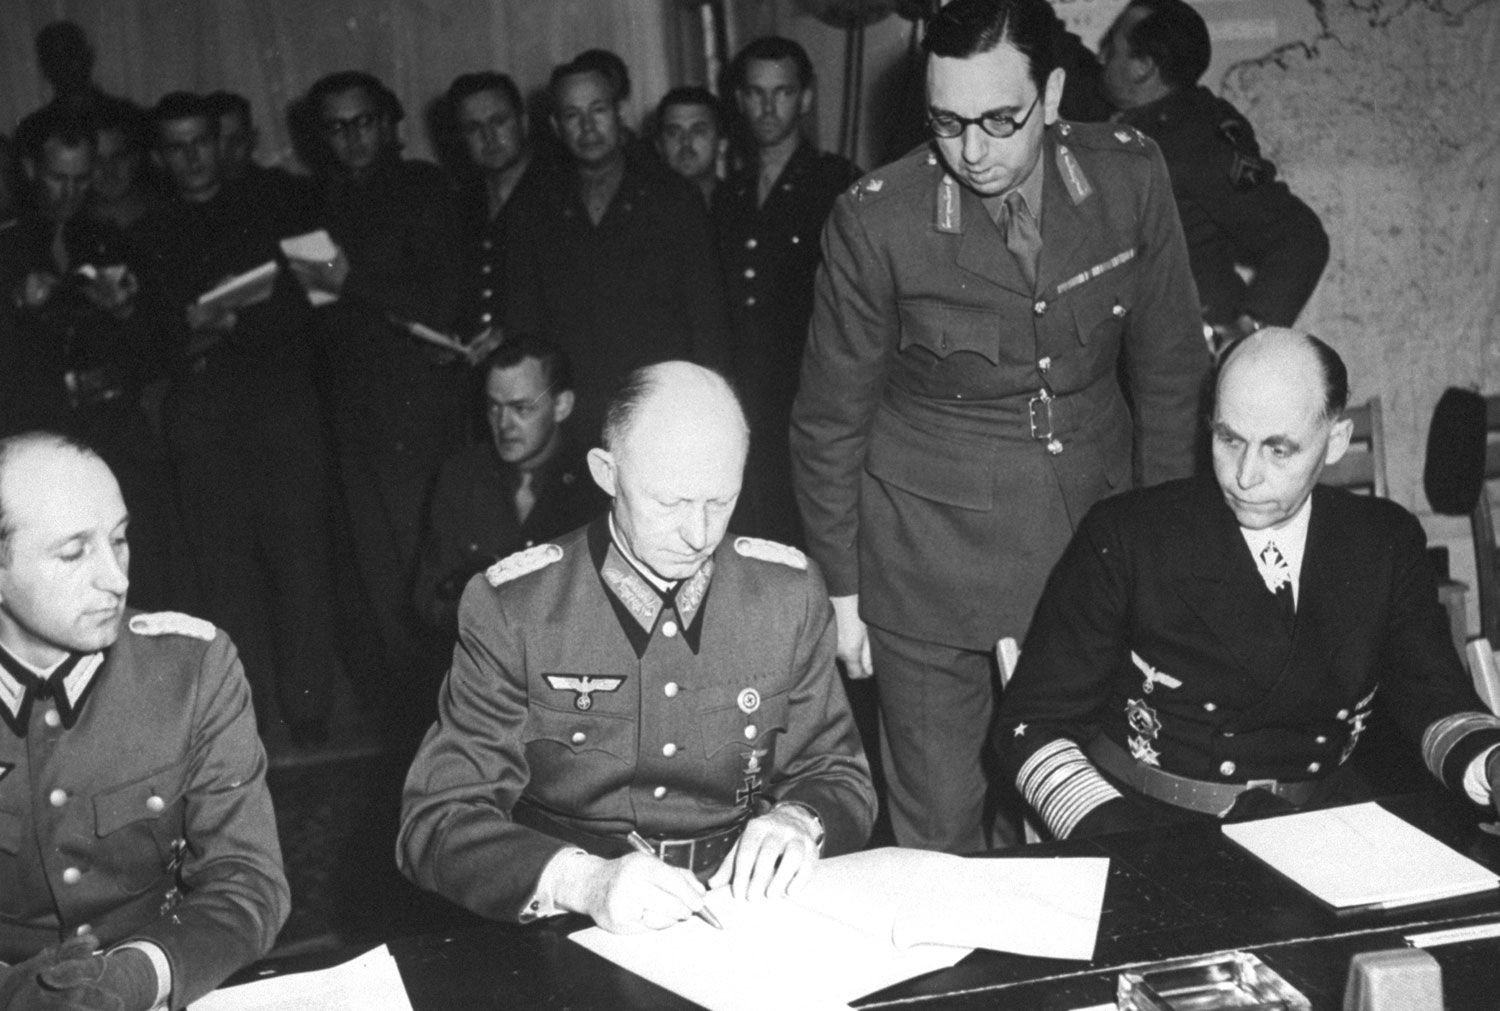 ColGen Alfred Jodl signing the documents of Germany’s surrender, Reims, France, 7 May 1945. (US Army Signal Corps photo)